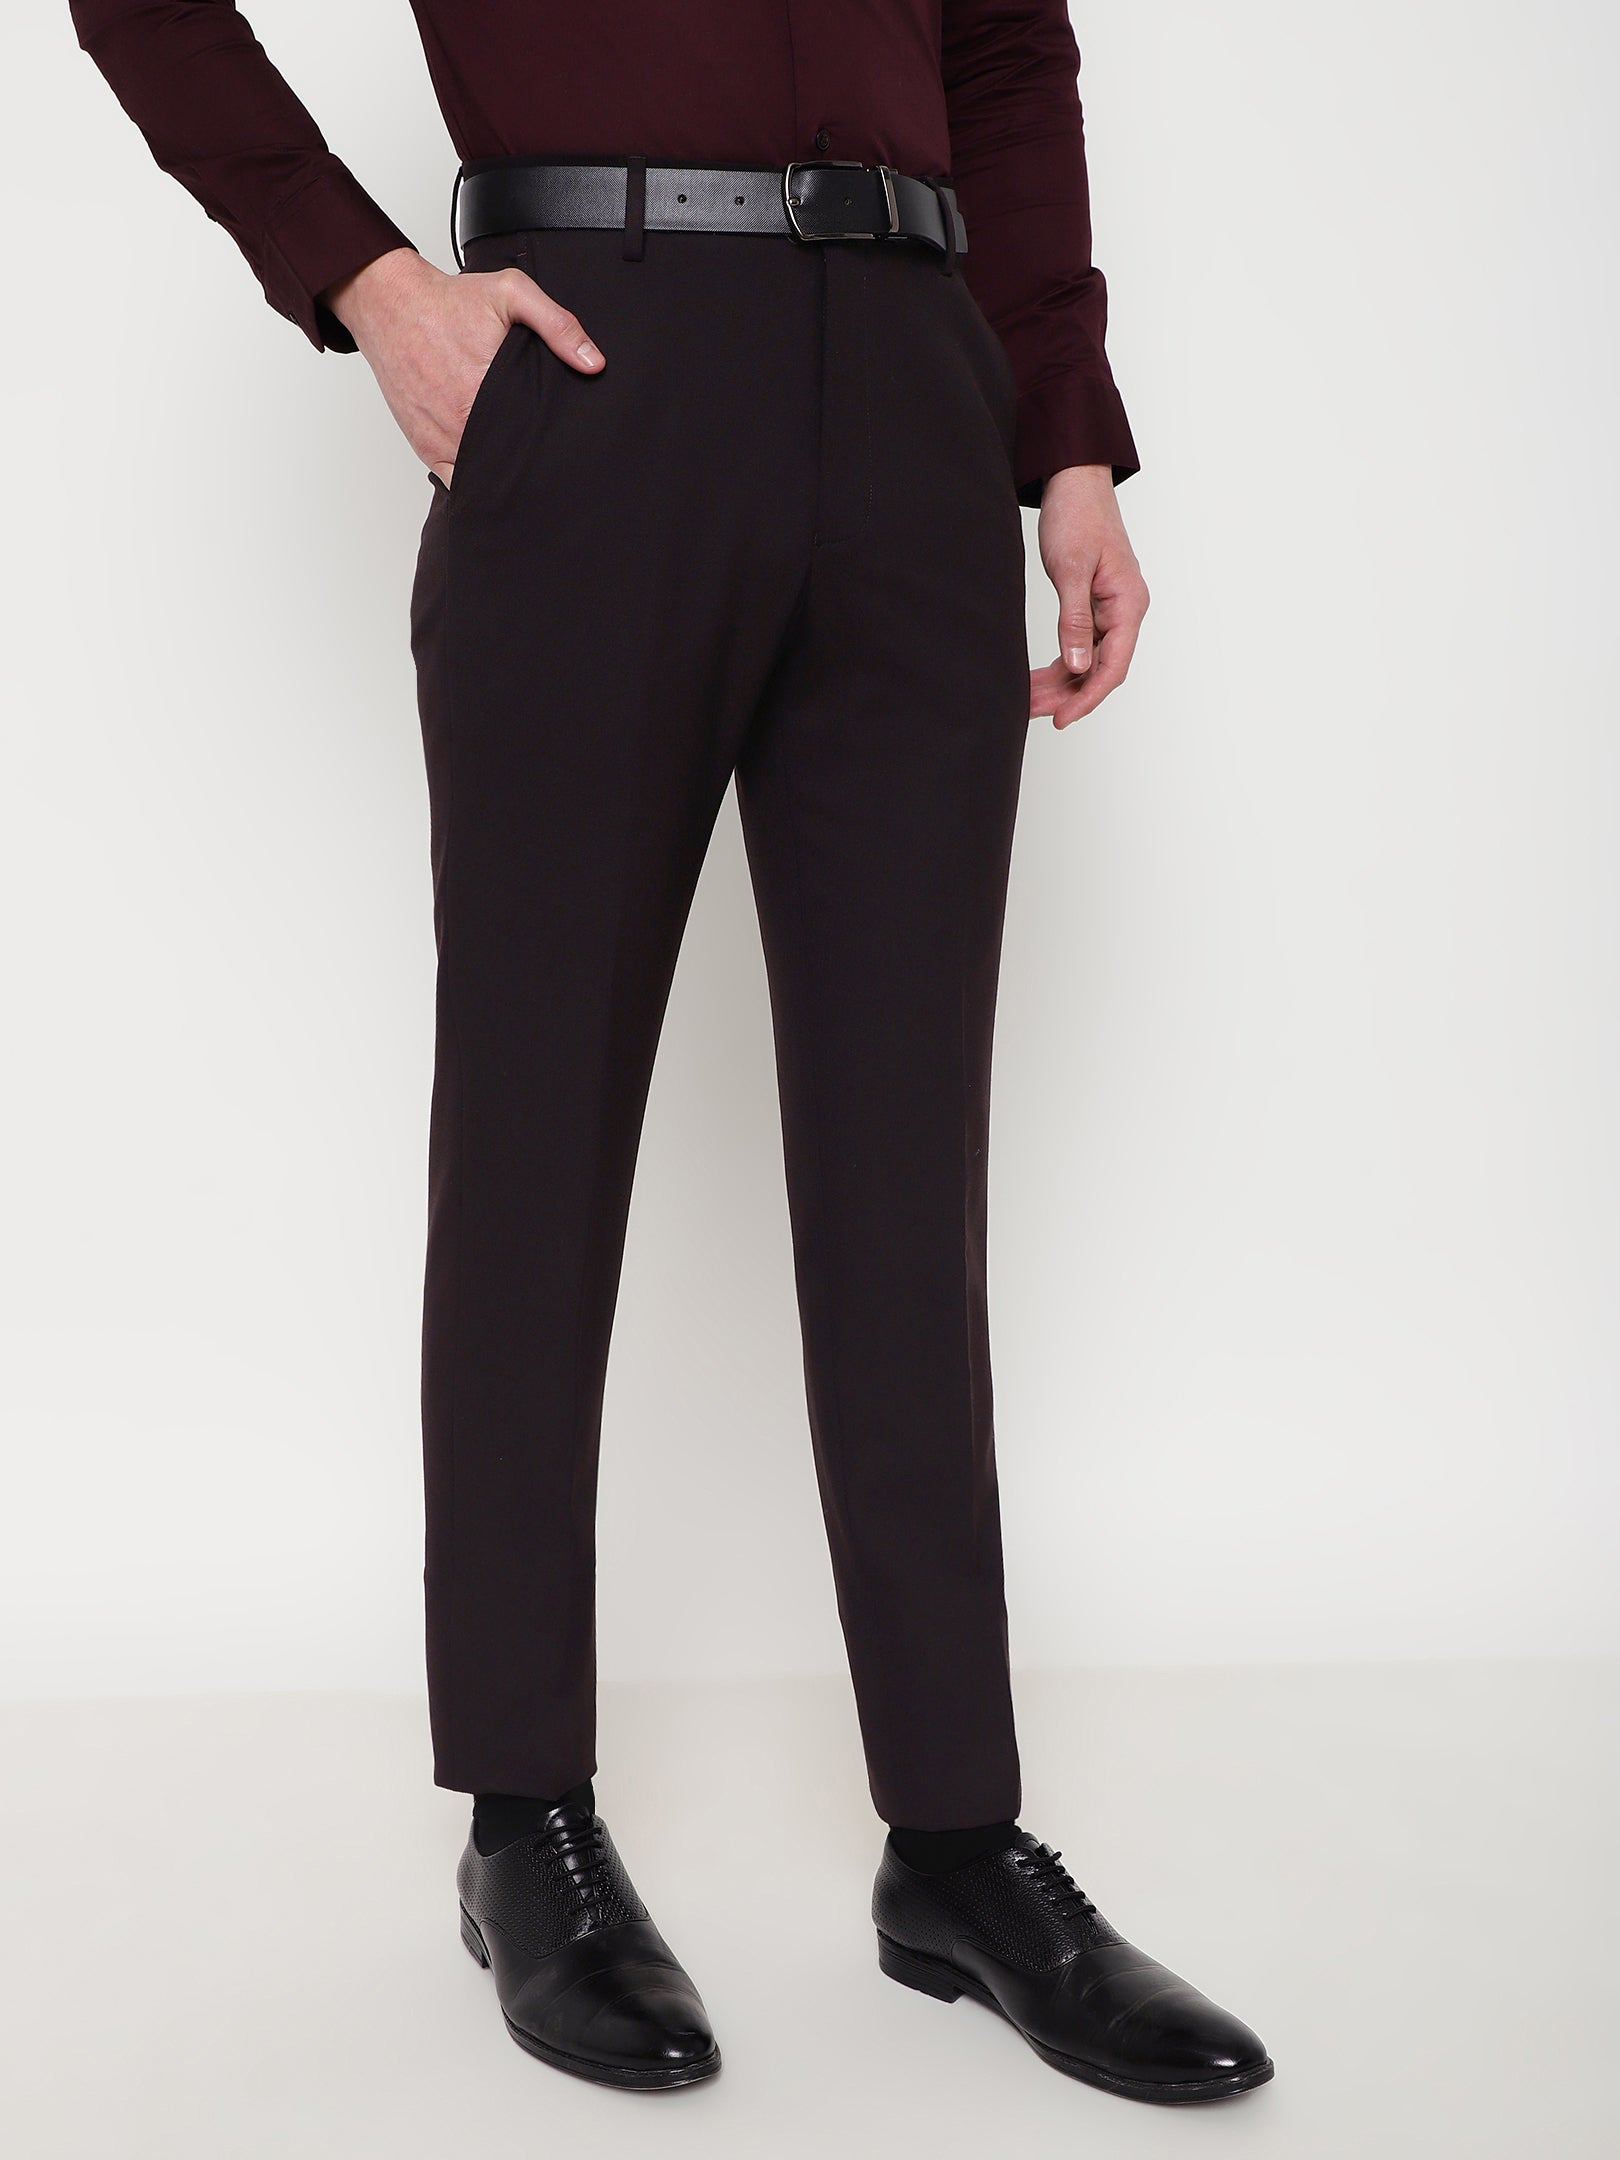 Fashion Business Stretch Suit Pants Man Luxury Brand Casual Pants Men  Straight Slim Fit Formal Pants M… | Mens pants casual, Mens dress pants,  Slim fit formal pants